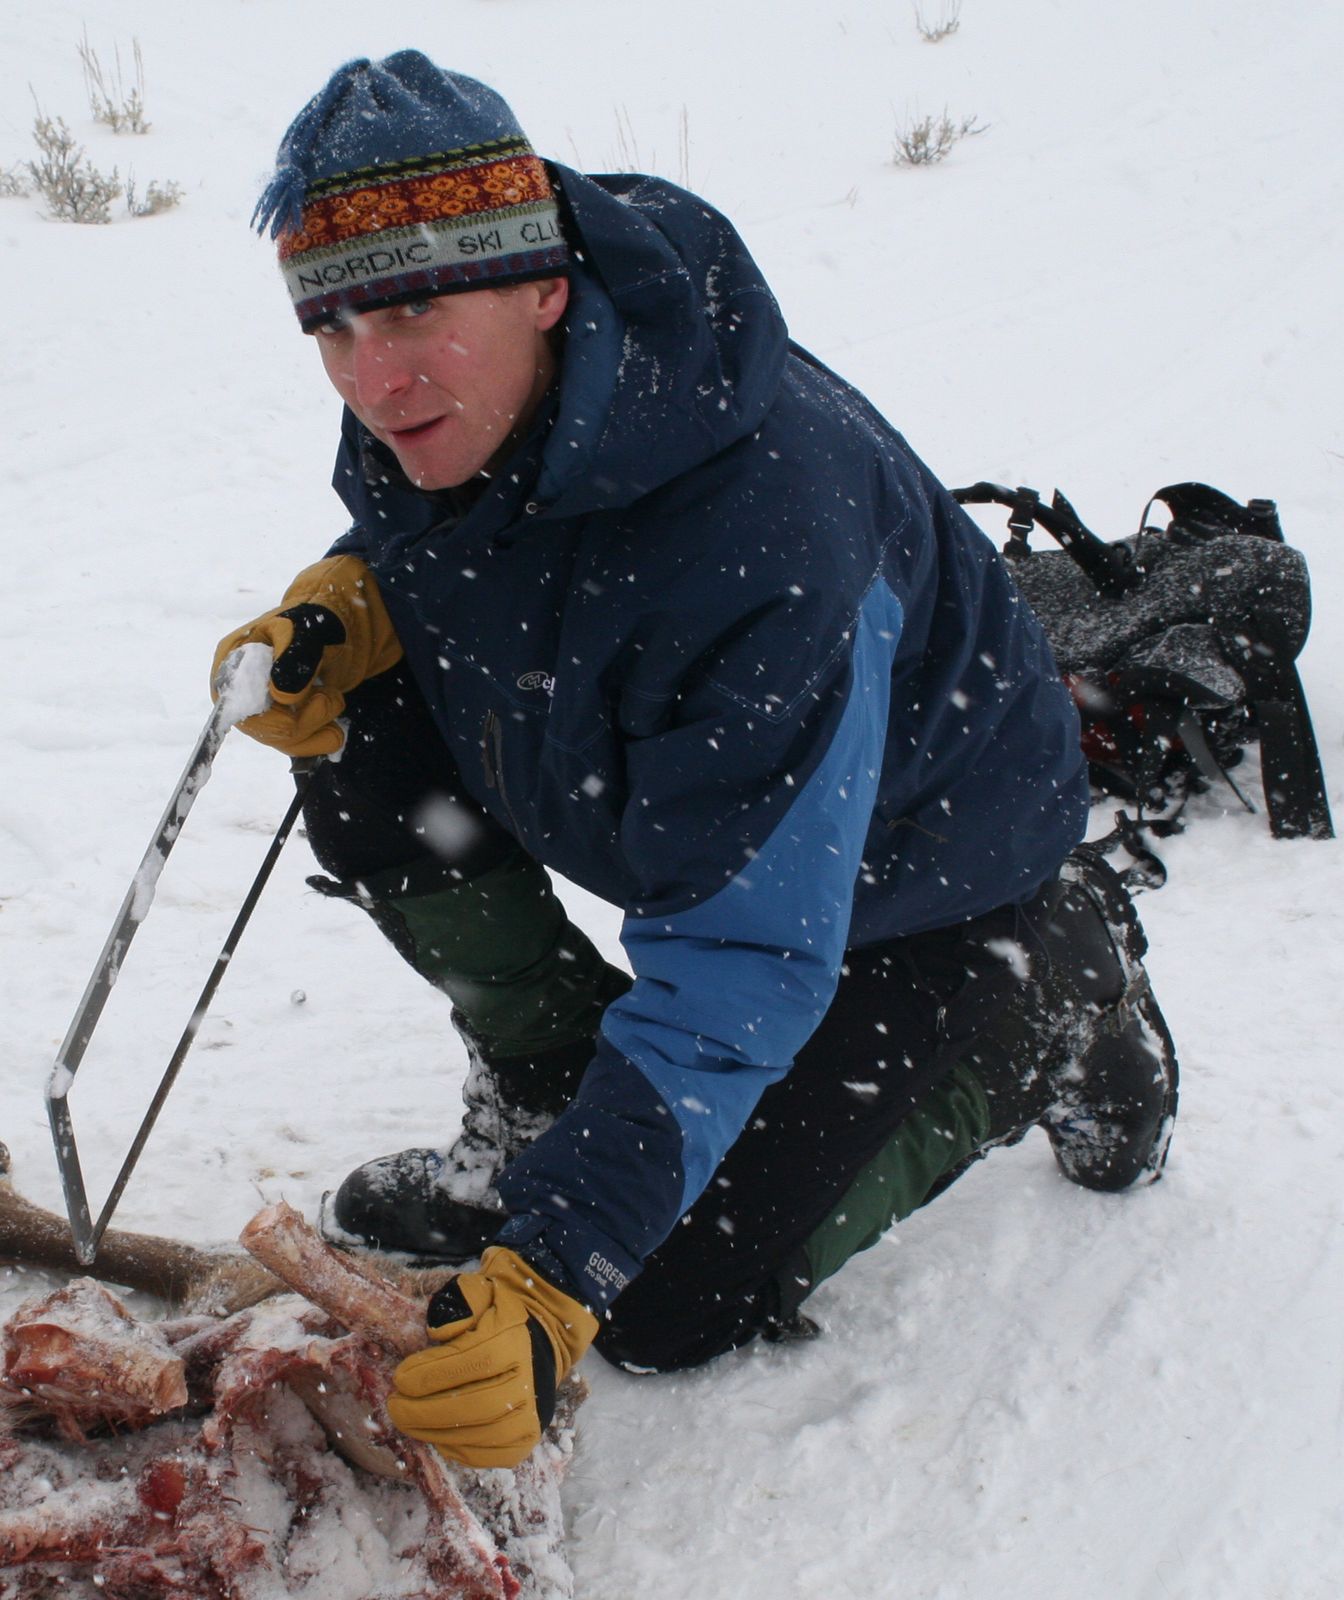 A man kneels in the snow holding a saw and an animal carcass.